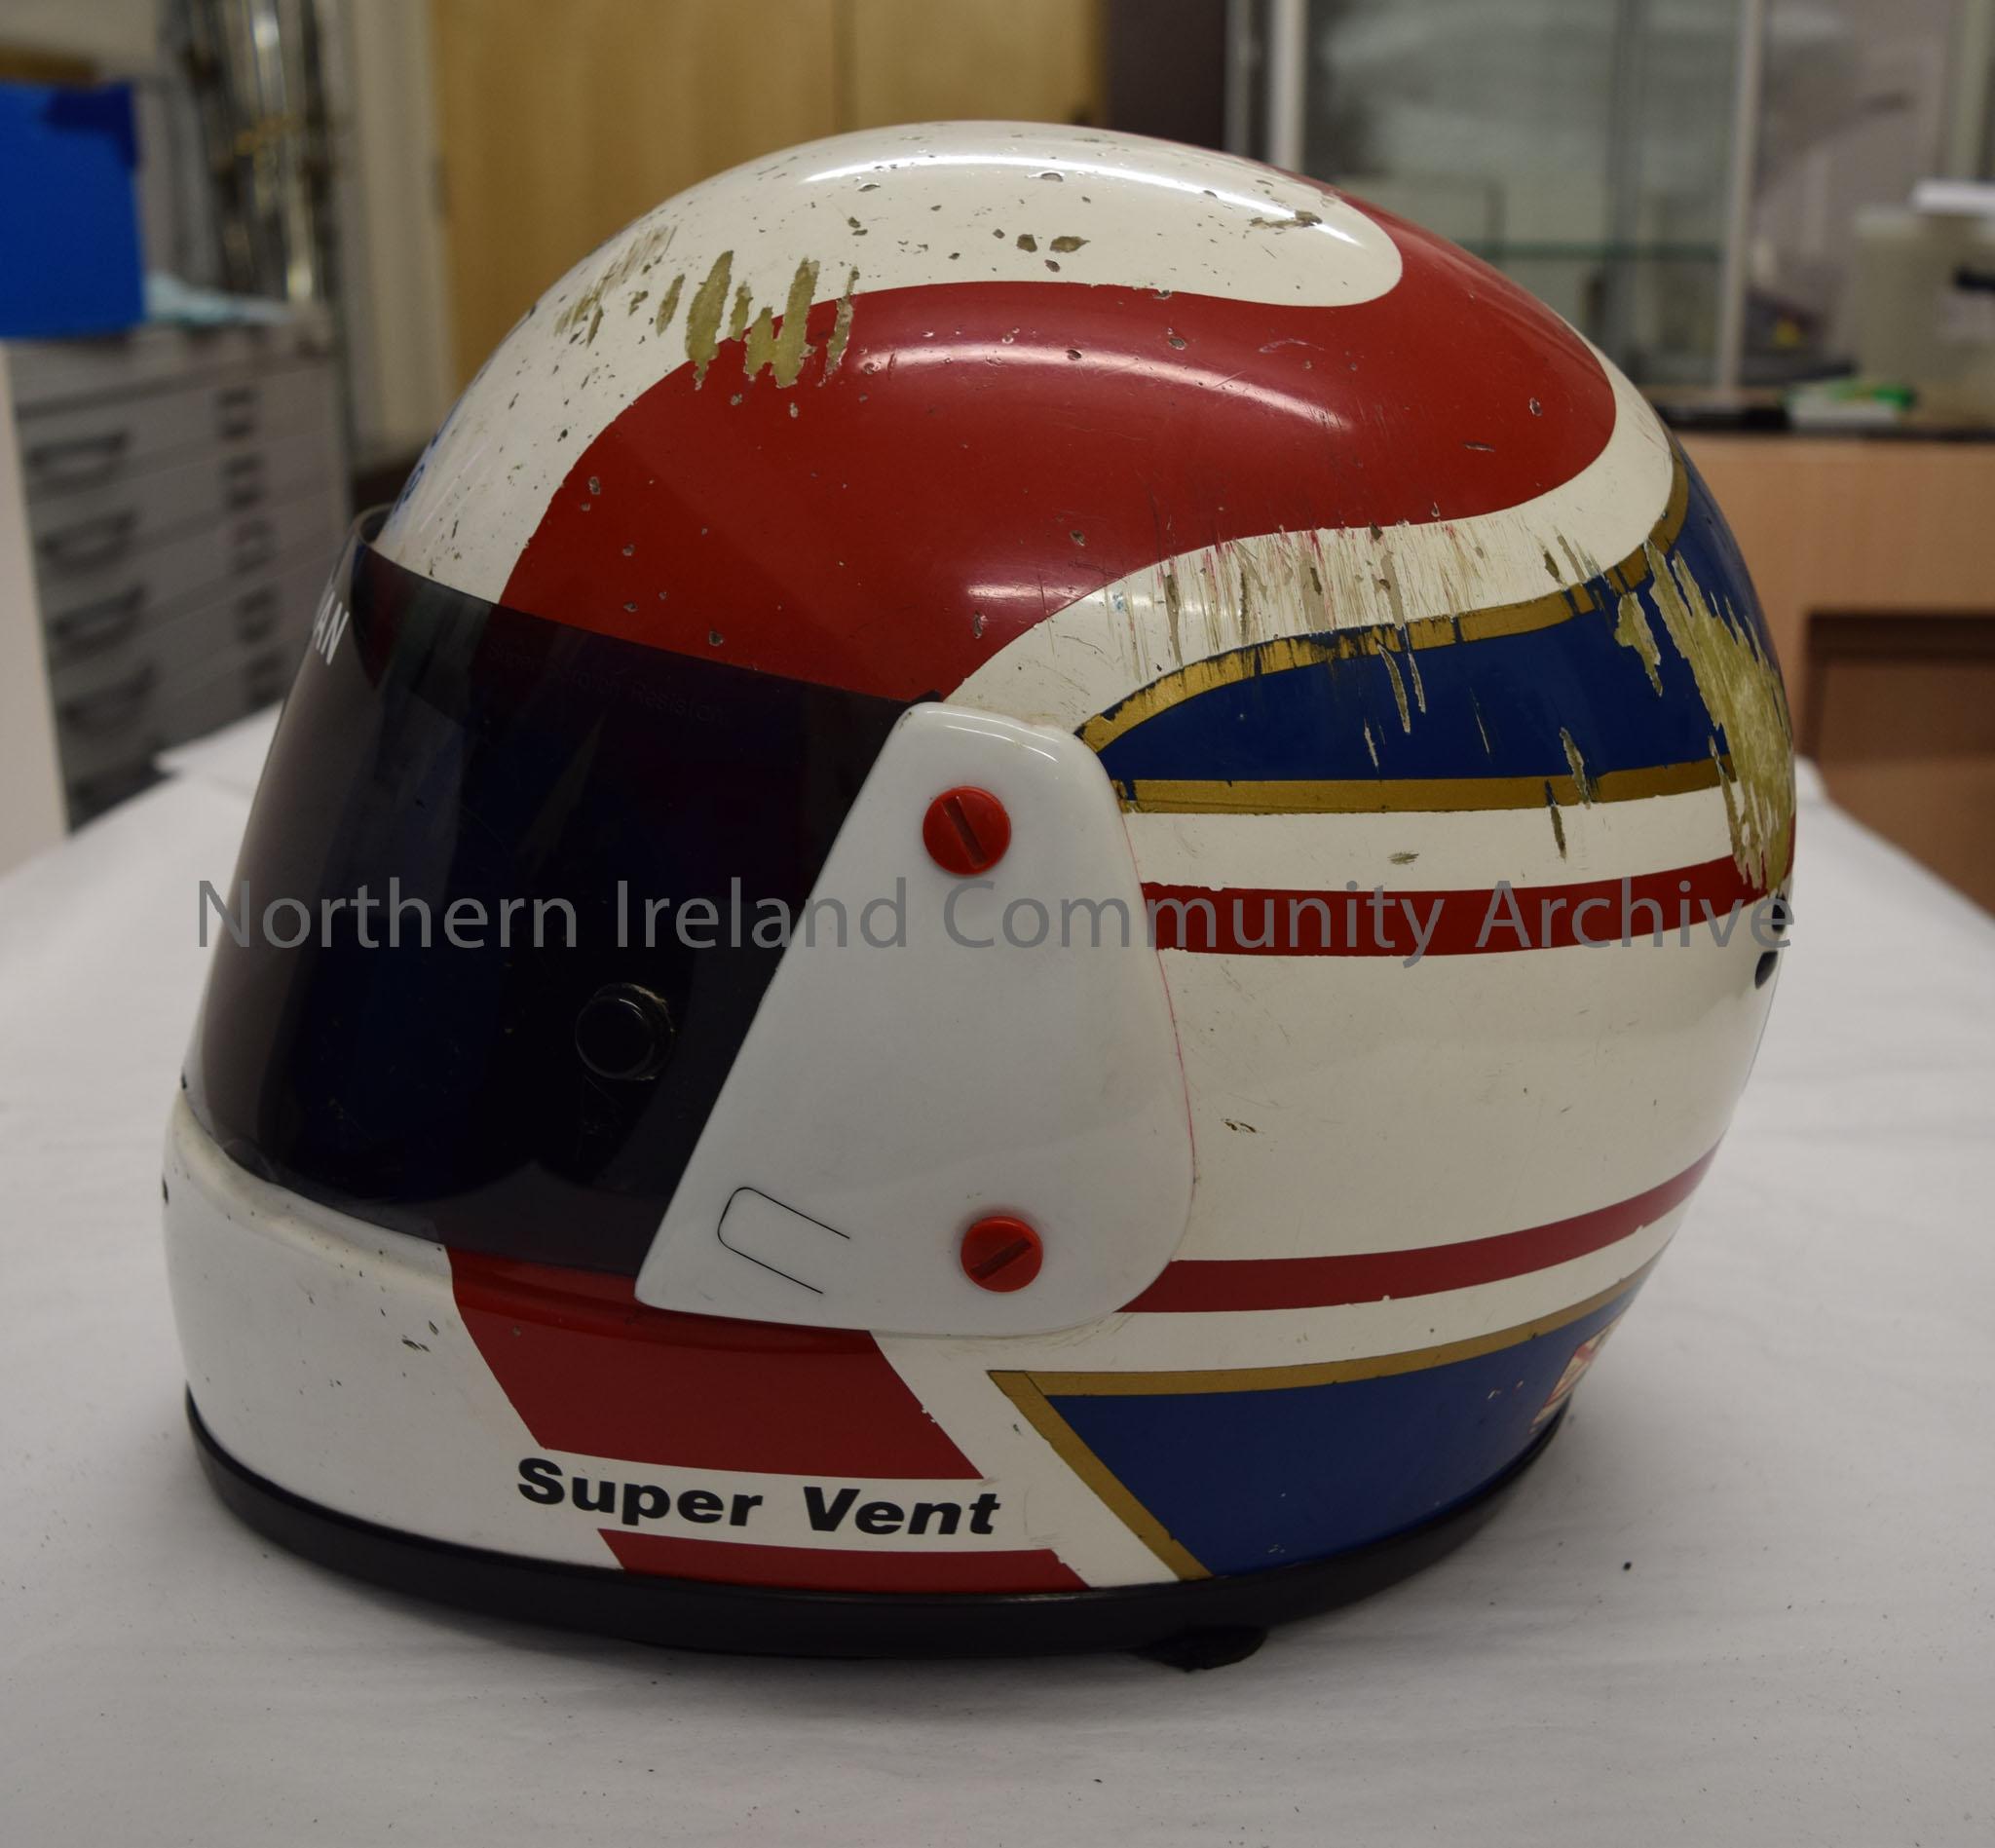 Arai motorcycle helmet belonging to Addie Swan. White helmet with red “m” shaped pattern on top a blue band with gold border around the back and botto… – 2016.56 (3)